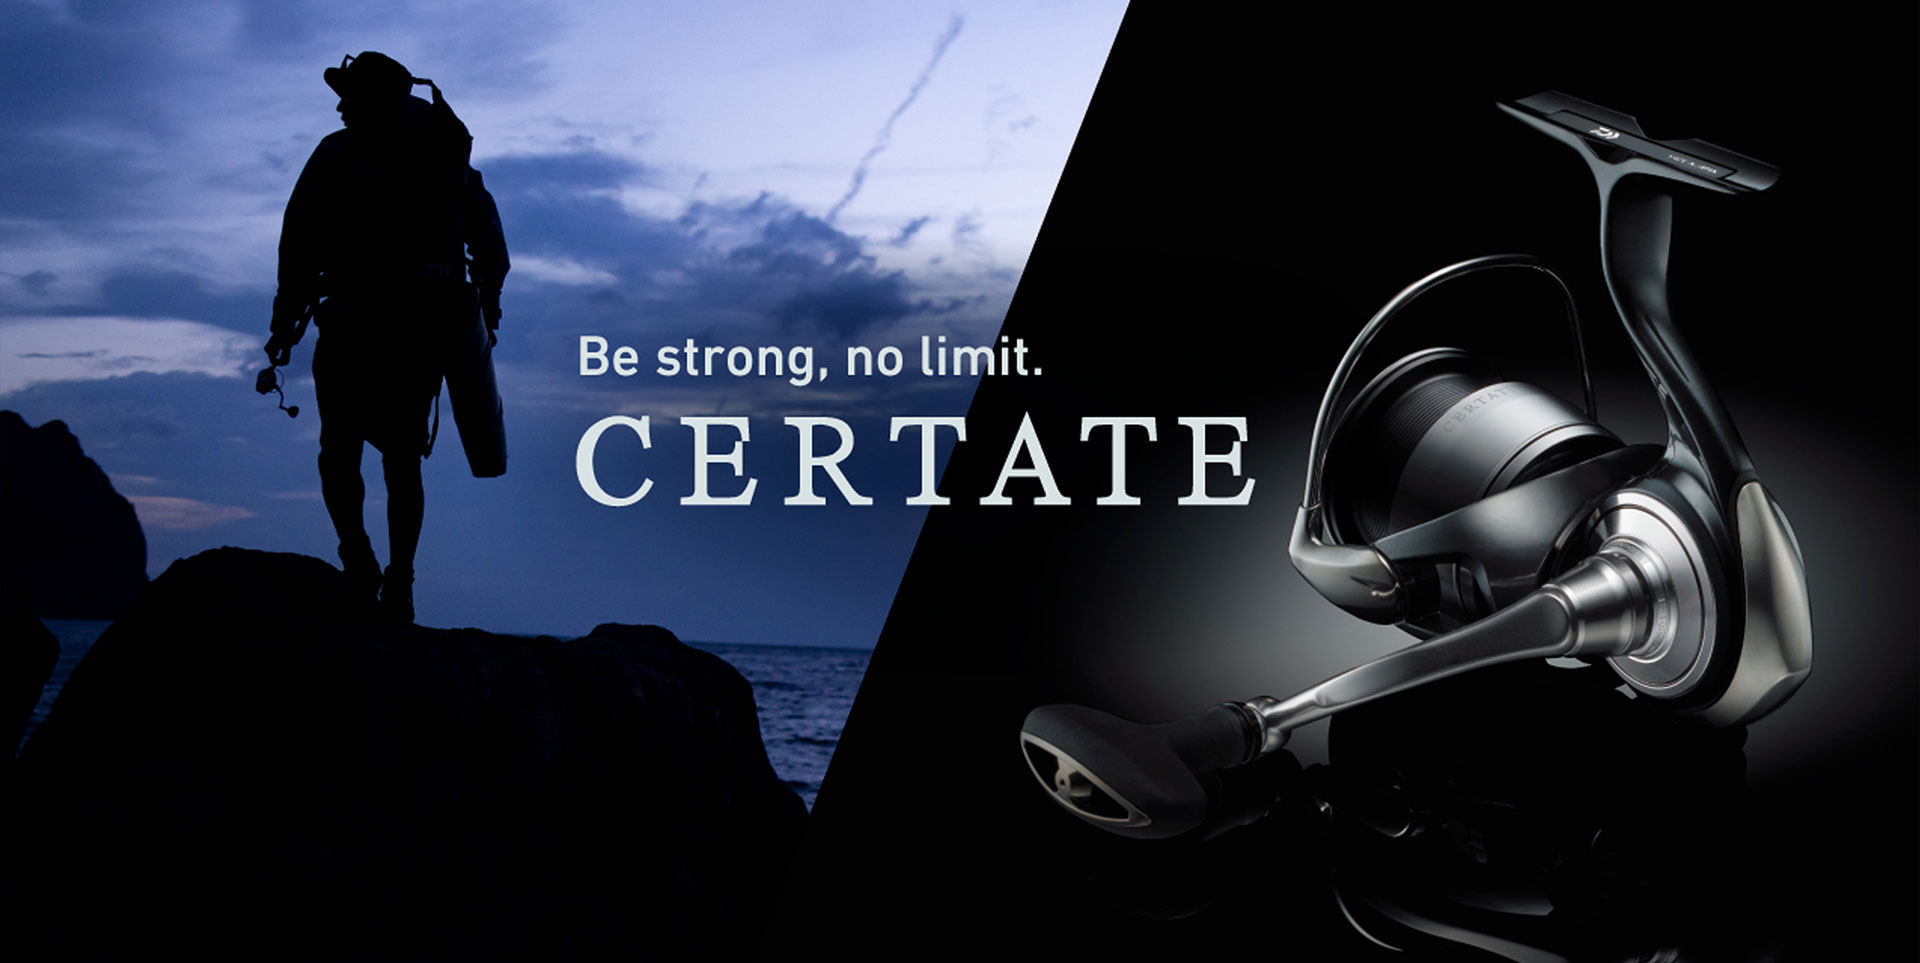 Be strong with Certate